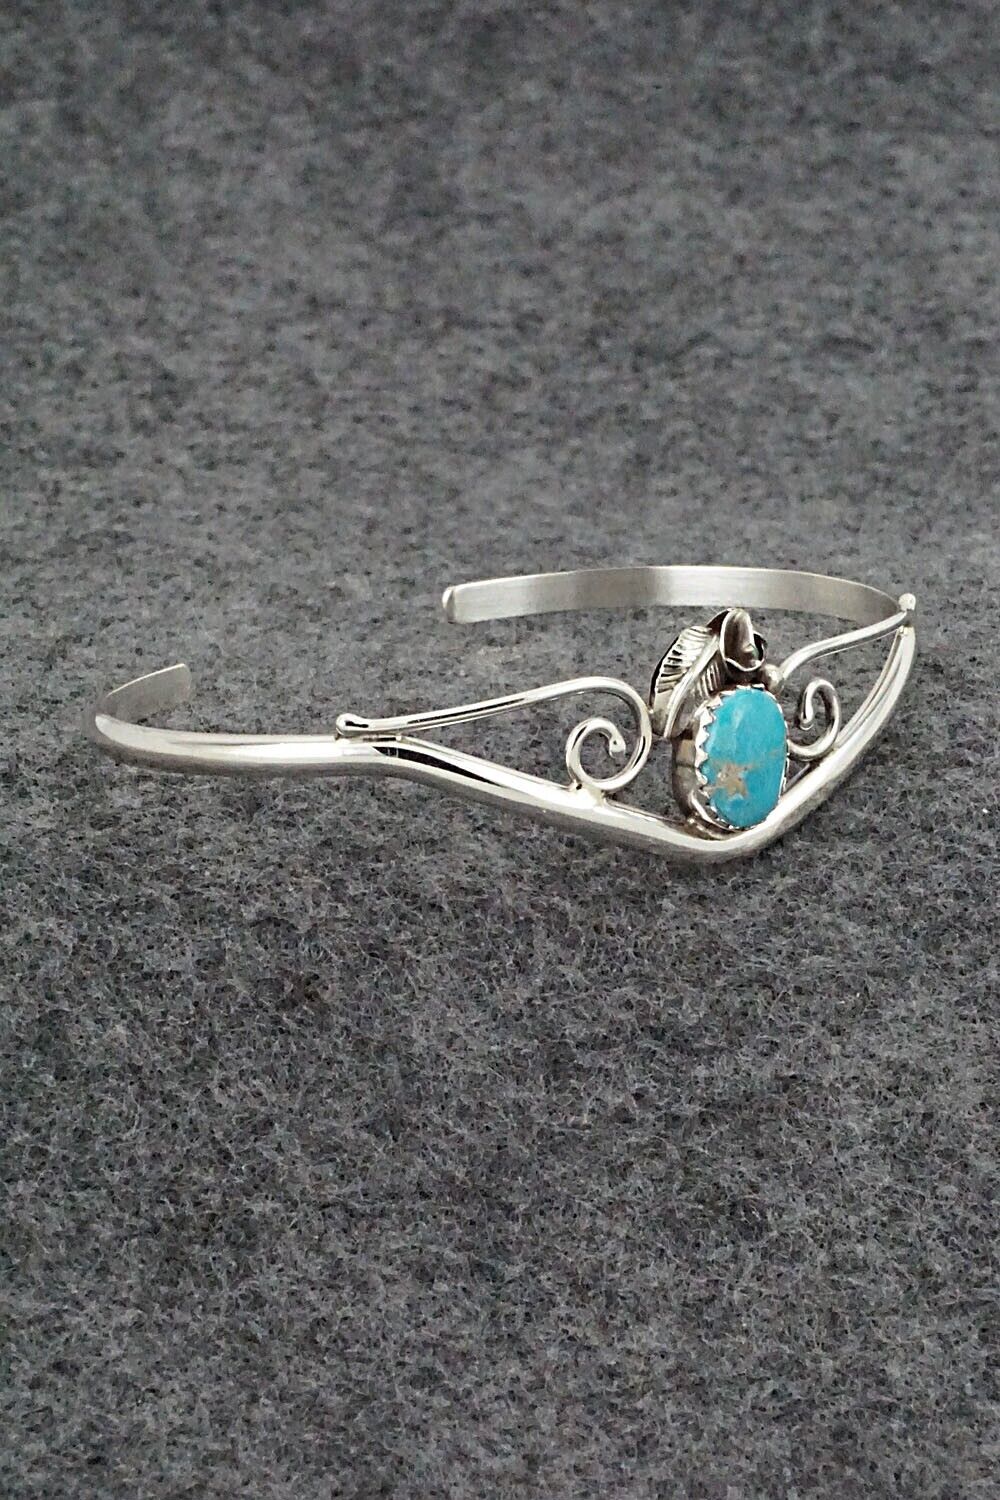 Turquoise & Sterling Silver Bracelet - Max Calladitto